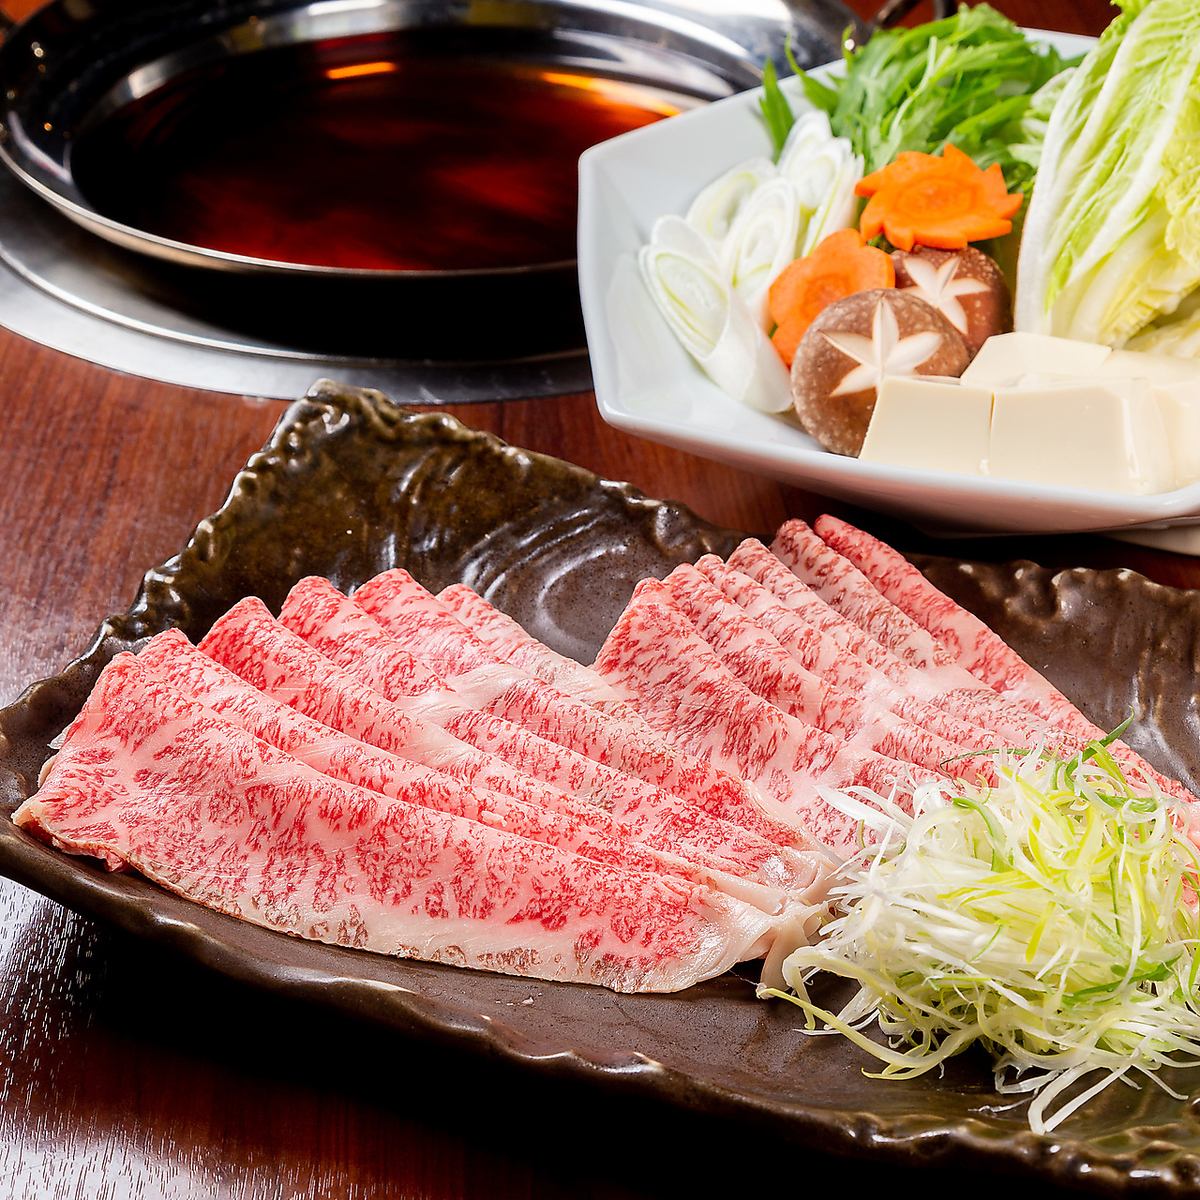 An exquisite dish that can only be tasted here! Tenzan pork shabu-shabu!